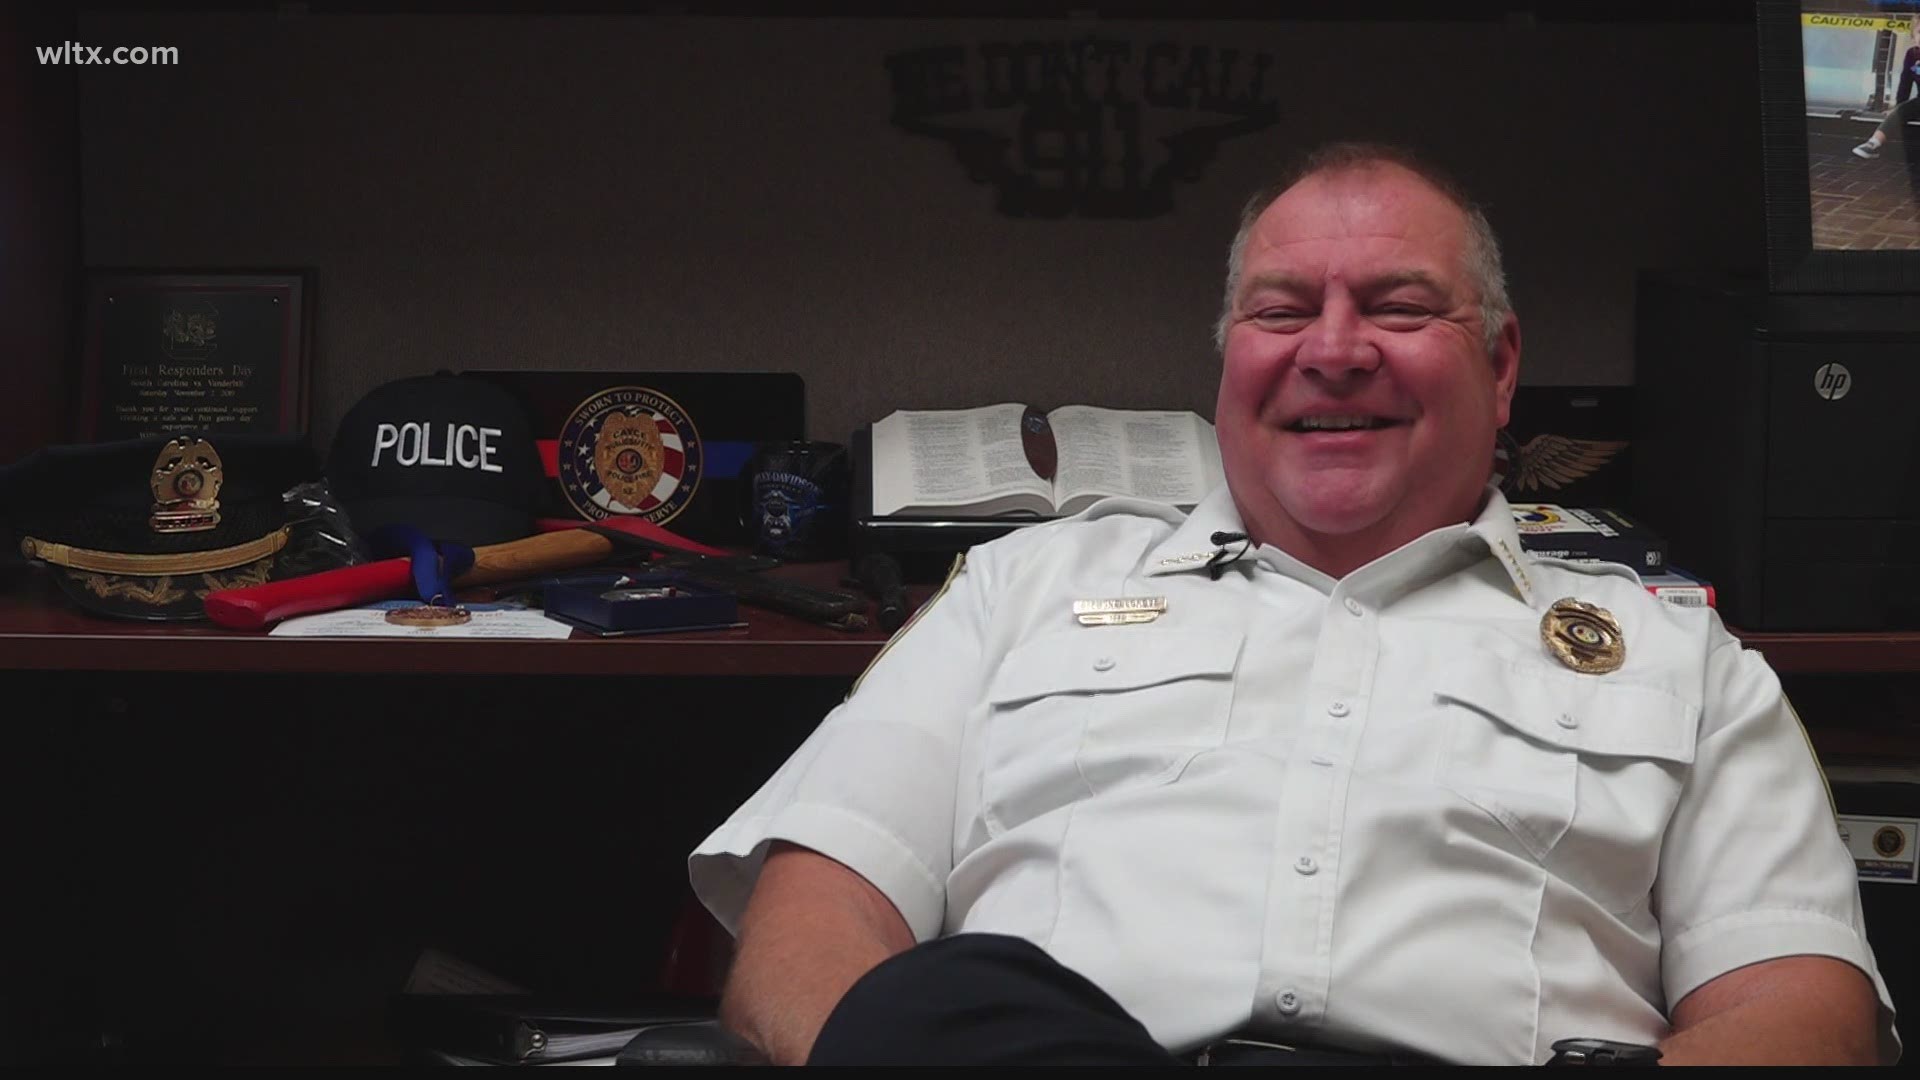 After more than 35 years in law enforcement, Director Byron Snellgrove is retiring to spend more time with his family.